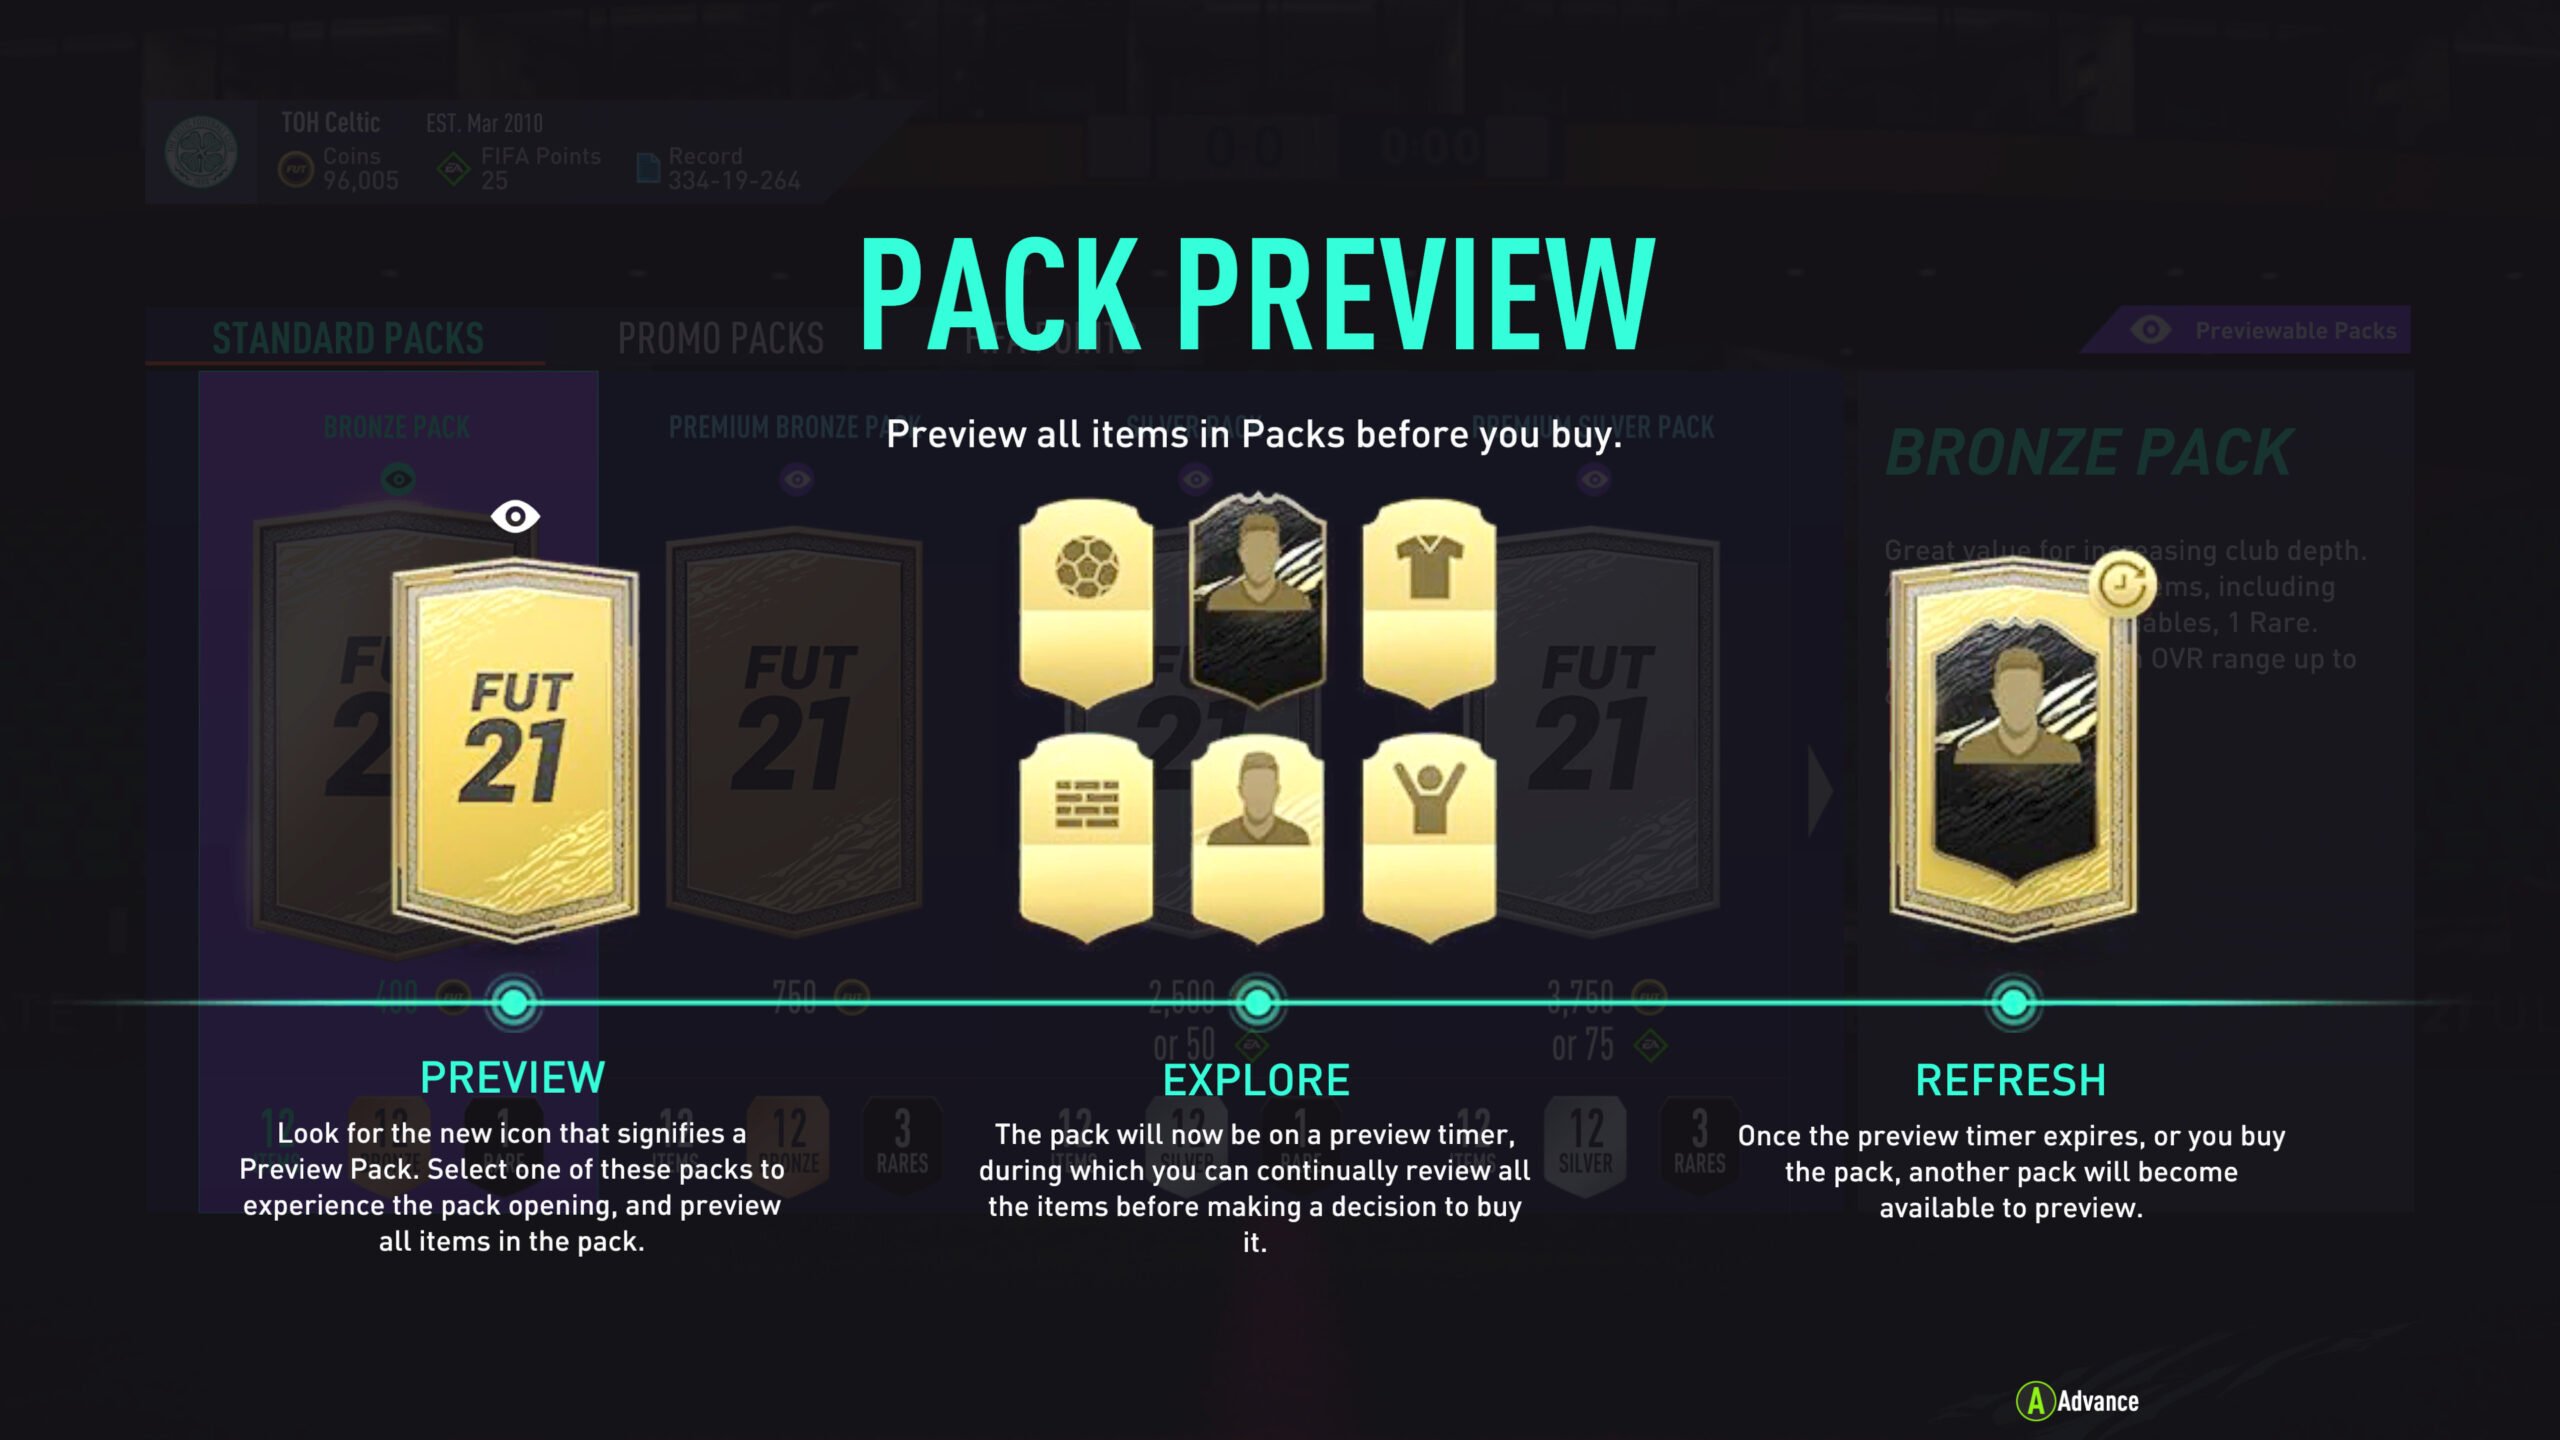 FIFA Ultimate Team 'loot boxes': gaming or gambling? - The Athletic